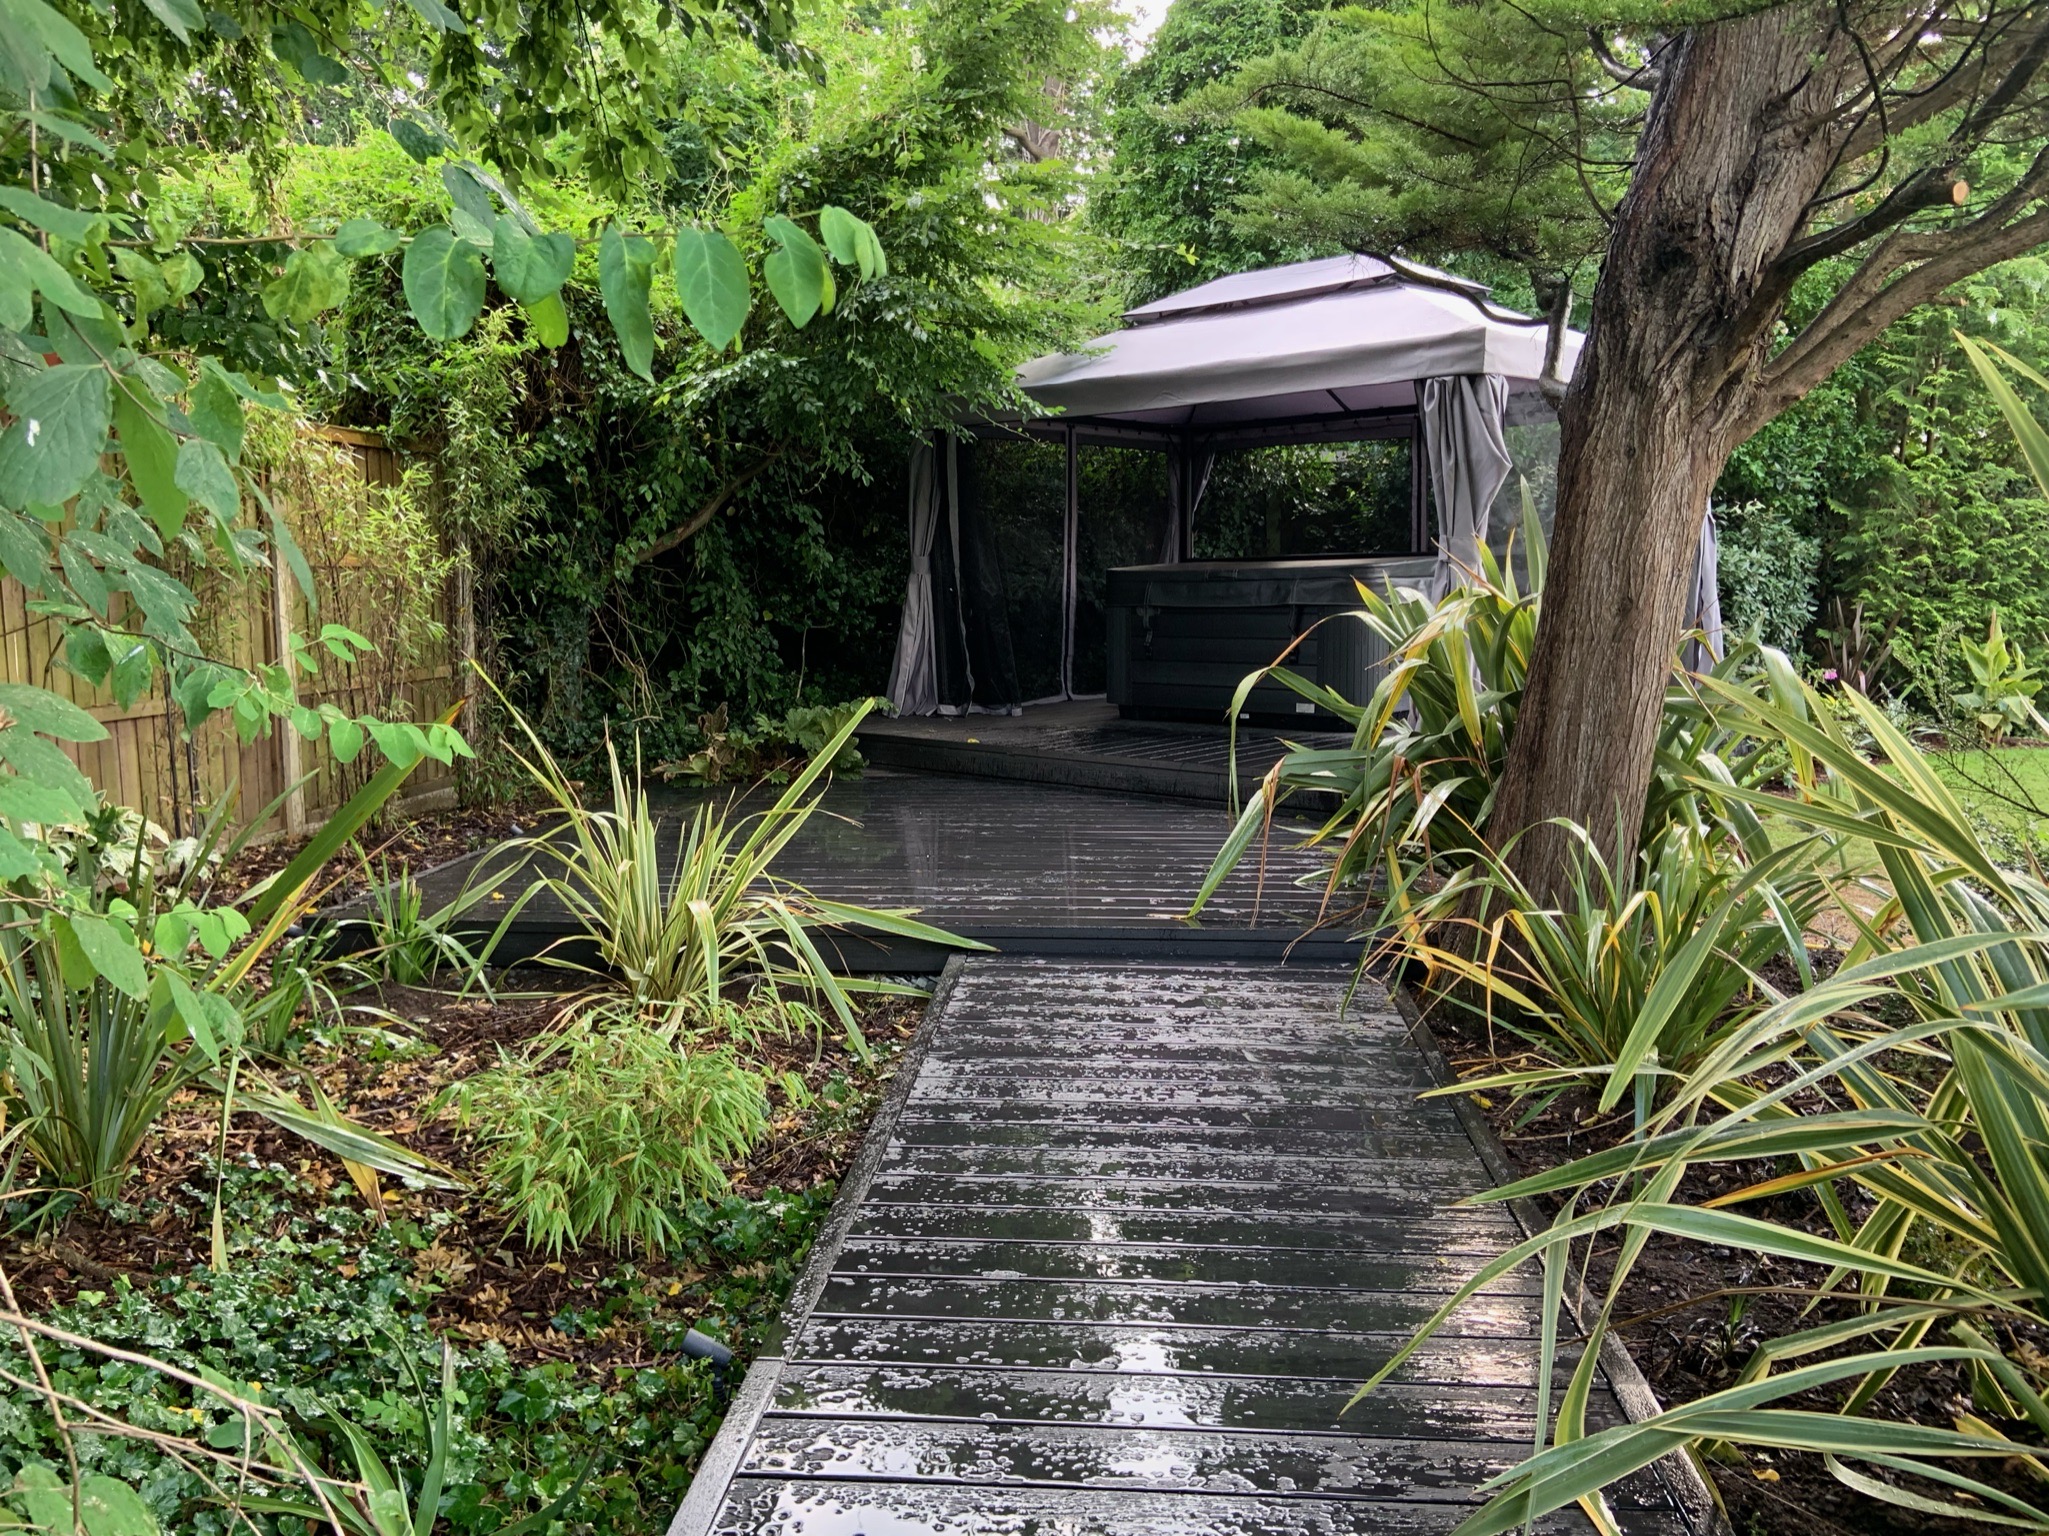 A backgarden featuring a dark reflective wooden walkway leading to a sheltered grey garden gazebo designed by Willow Alexander